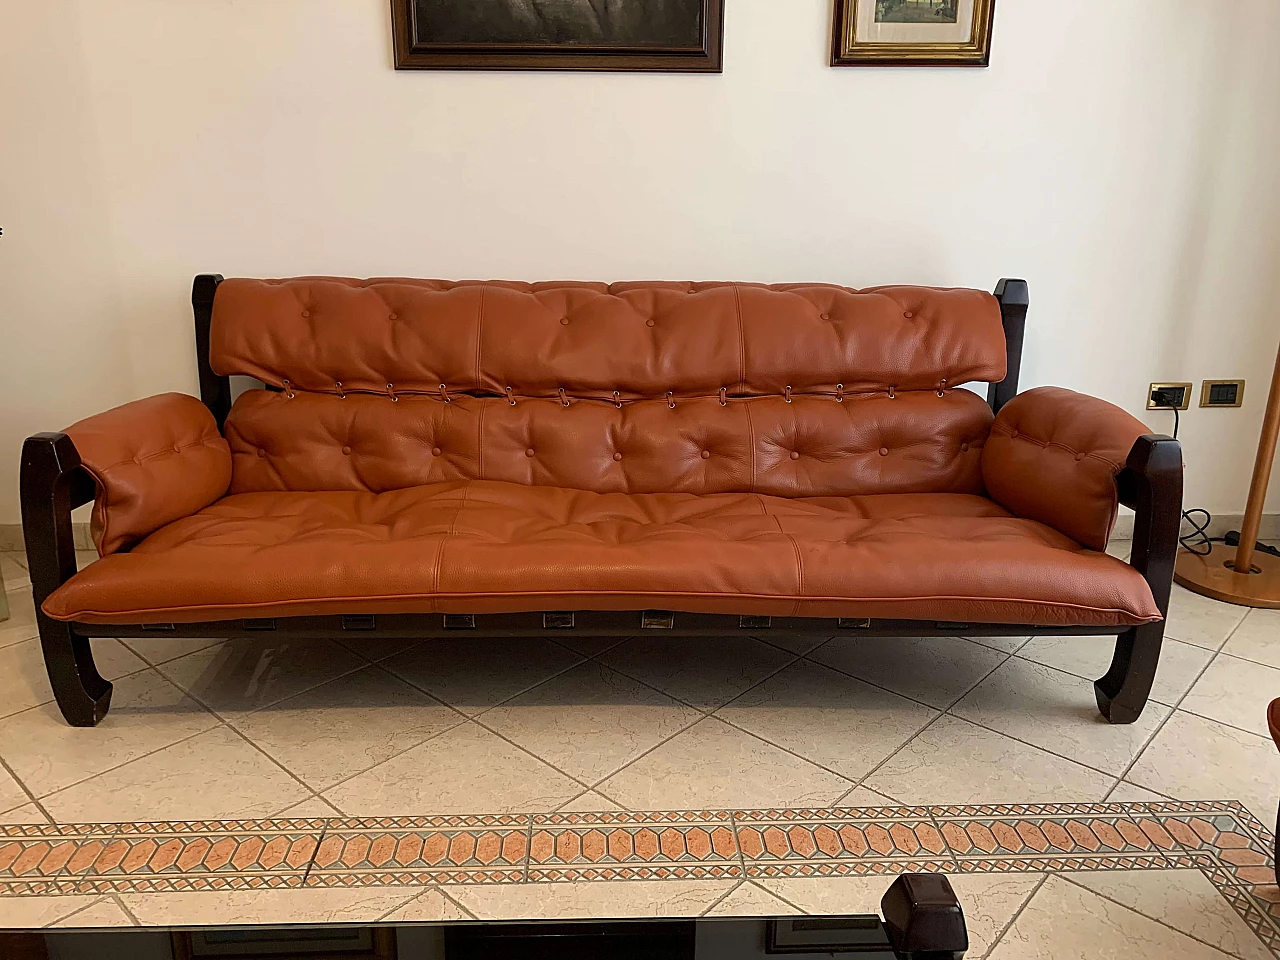 Samurai ebony and leather couch and pair of armchair by Luciano Frigerio, 1970s 1476952